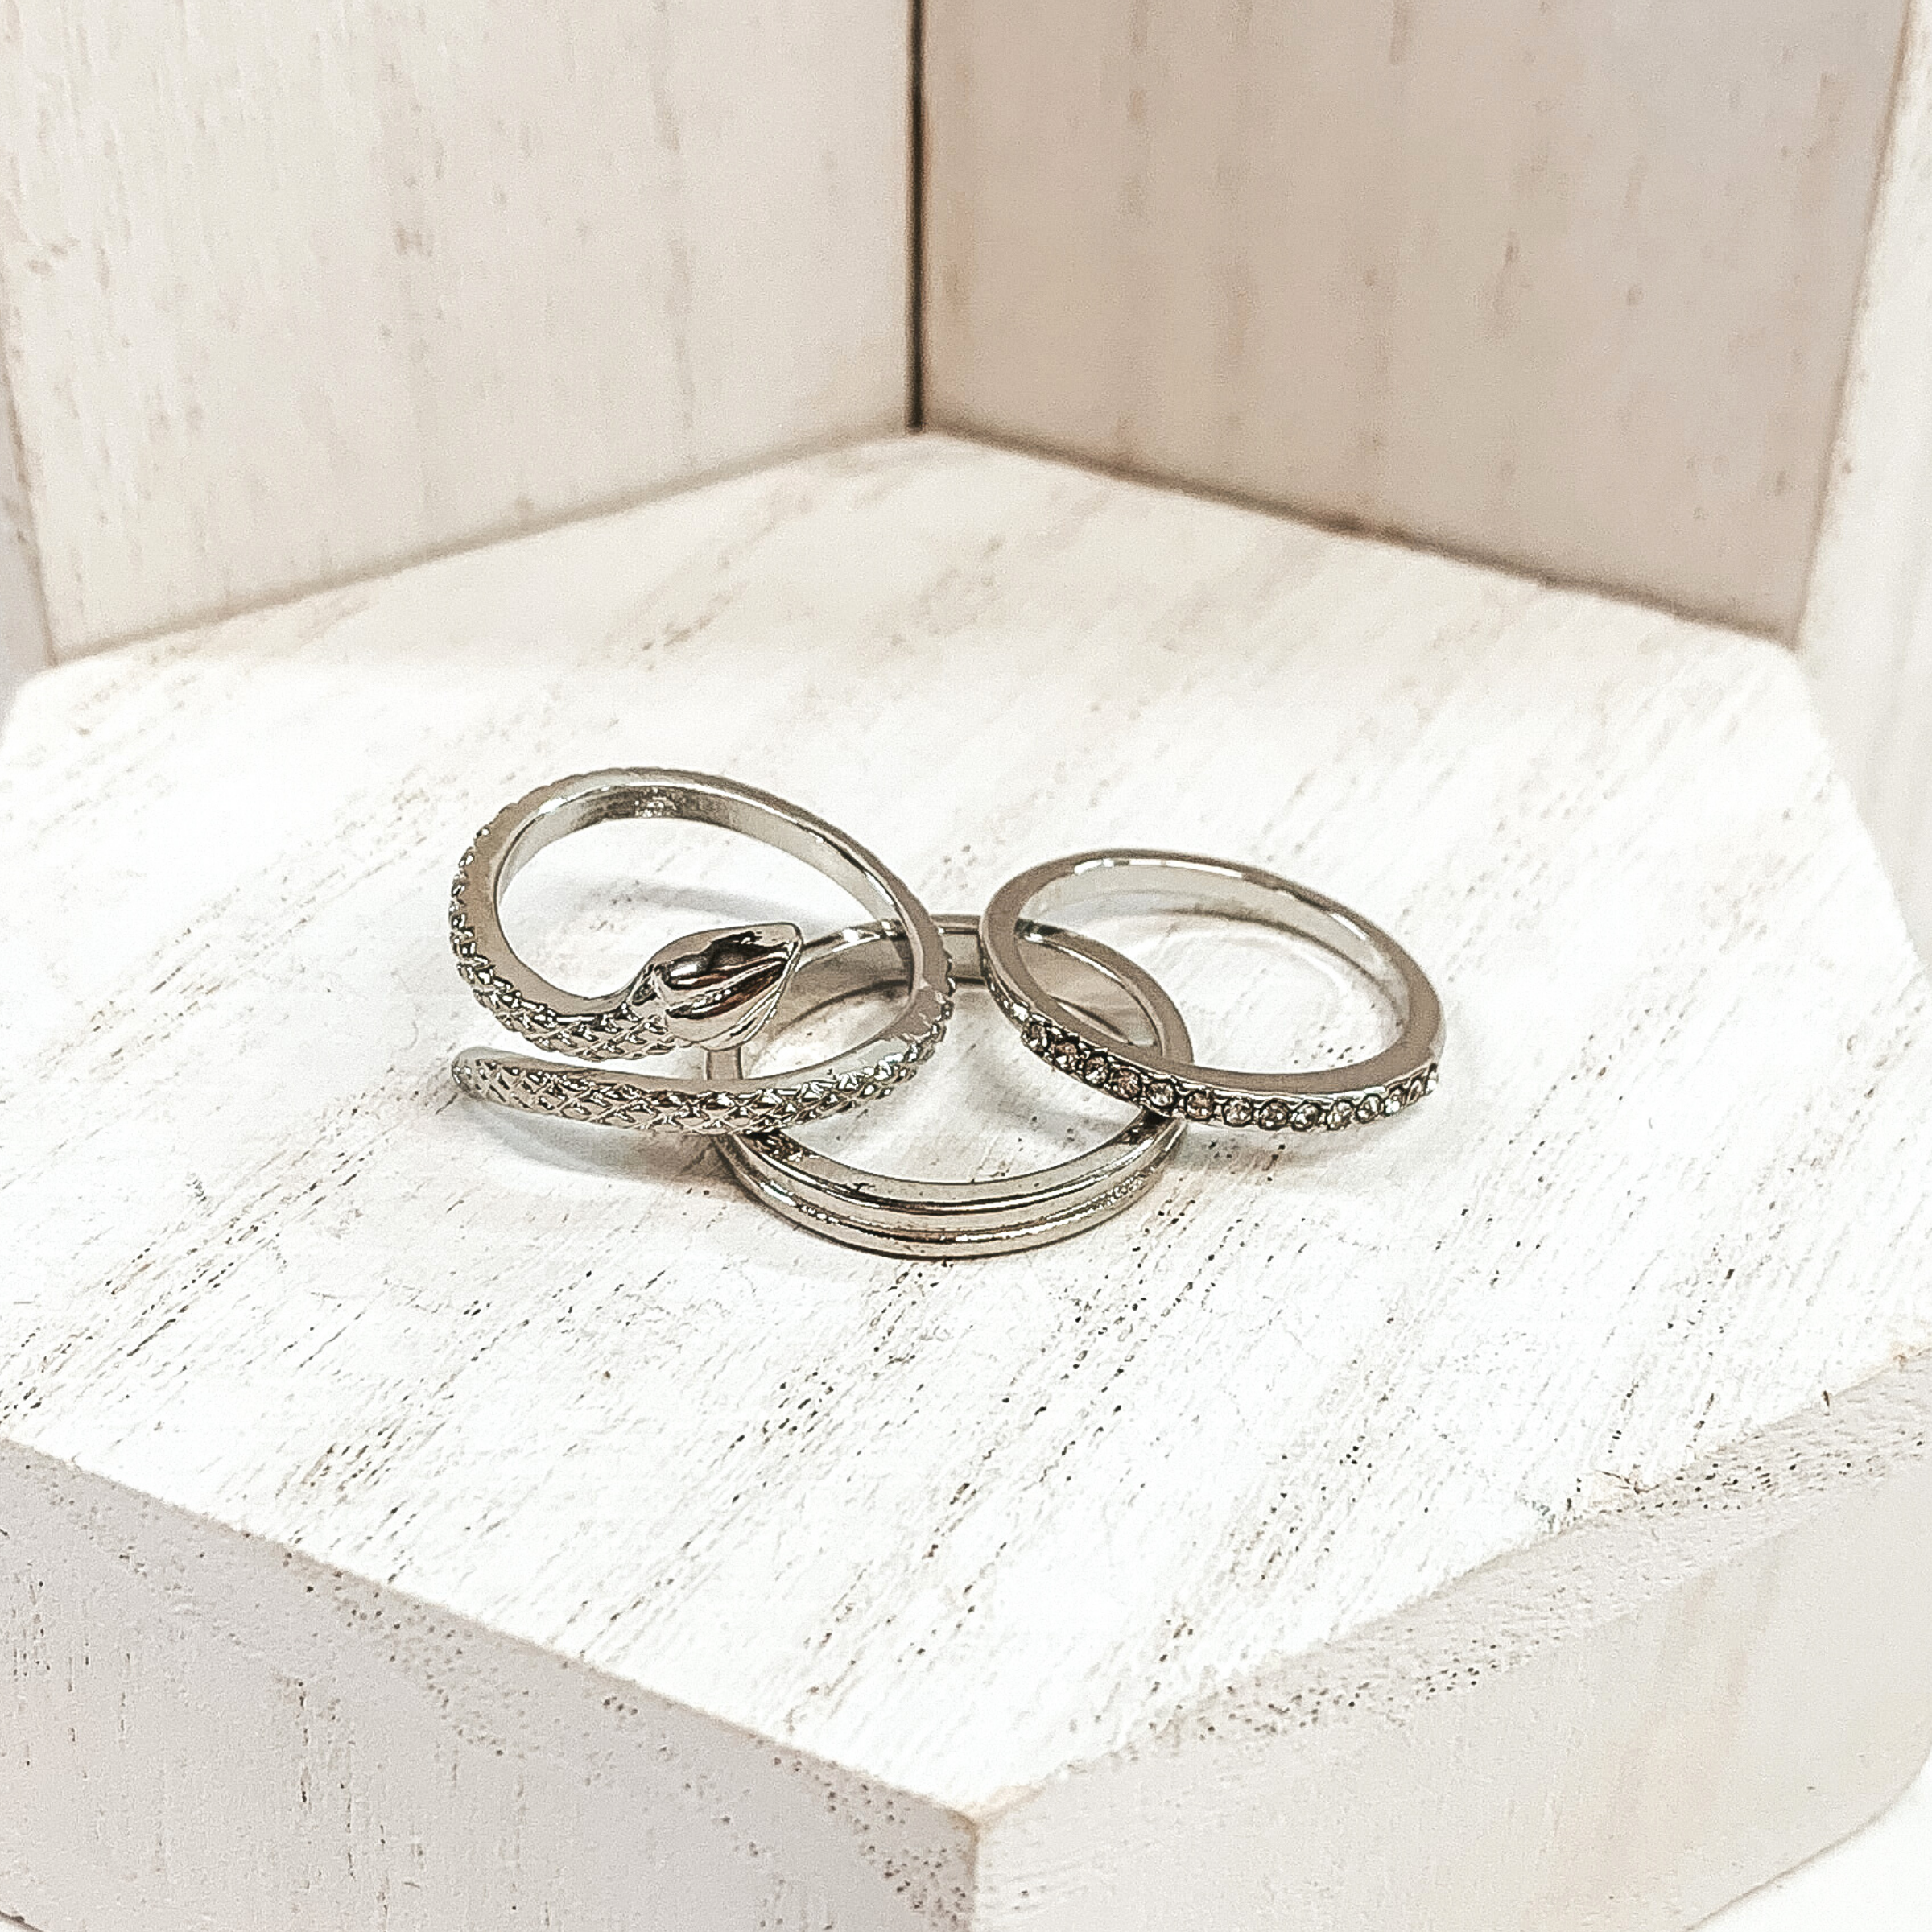 This silver ring set is very edgy. It includes one snake ring, one double layered ring, and one ring with a row of crystals. These rings are pictured on a white background.